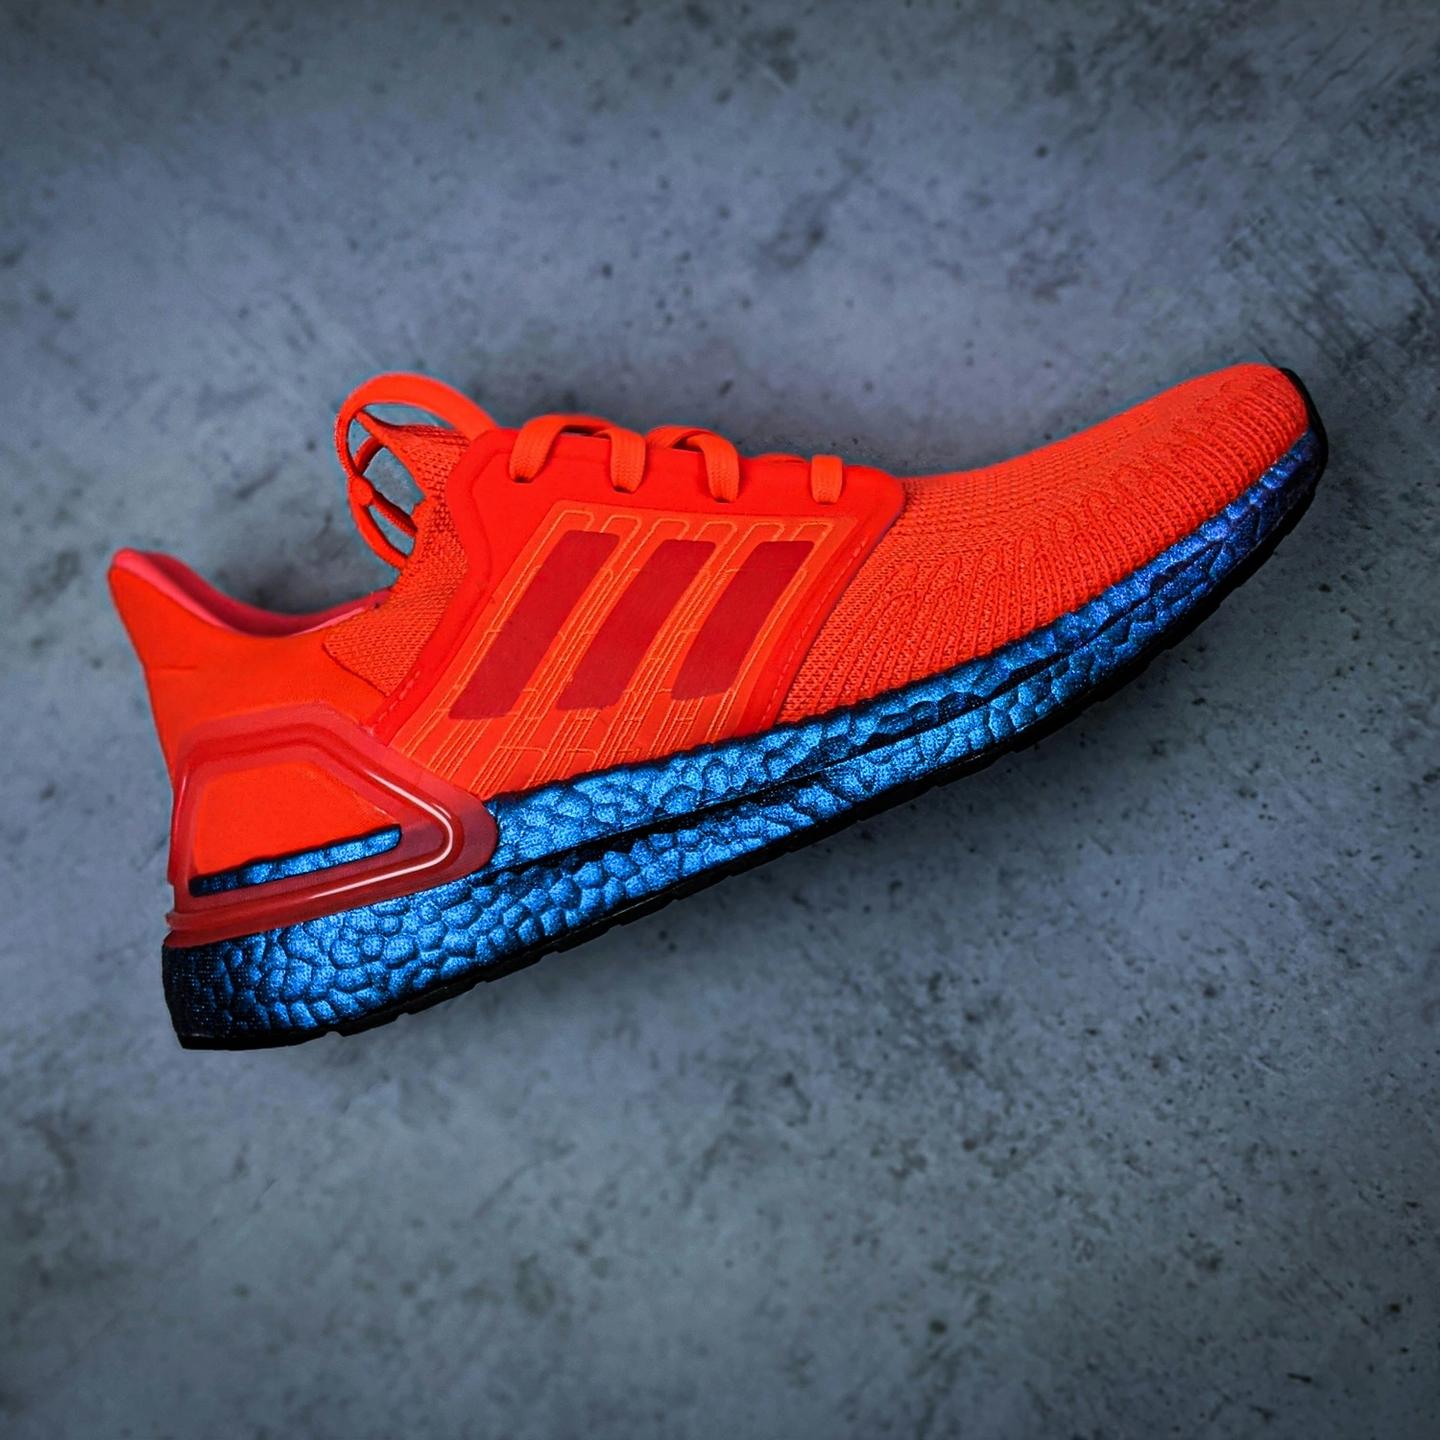 a pair of orange and blue adidas ultra boost shoes are sitting on a concrete surface .​​​​‌﻿‍﻿​‍​‍‌‍﻿﻿‌﻿​‍‌‍‍‌‌‍‌﻿‌‍‍‌‌‍﻿‍​‍​‍​﻿‍‍​‍​‍‌﻿​﻿‌‍​‌‌‍﻿‍‌‍‍‌‌﻿‌​‌﻿‍‌​‍﻿‍‌‍‍‌‌‍﻿﻿​‍​‍​‍﻿​​‍​‍‌‍‍​‌﻿​‍‌‍‌‌‌‍‌‍​‍​‍​﻿‍‍​‍​‍‌‍‍​‌﻿‌​‌﻿‌​‌﻿​​​﻿‍‍​‍﻿﻿​‍﻿﻿‌‍﻿​‌‍﻿﻿‌‍​﻿‌‍​‌‌‍﻿​‌‍‍​‌‍﻿﻿‌﻿​﻿‌﻿‌​​﻿‍‍​﻿​﻿​﻿​﻿​﻿​﻿​﻿​﻿​‍﻿﻿‌‍‍‌‌‍﻿‍‌﻿‌​‌‍‌‌‌‍﻿‍‌﻿‌​​‍﻿﻿‌‍‌‌‌‍‌​‌‍‍‌‌﻿‌​​‍﻿﻿‌‍﻿‌‌‍﻿﻿‌‍‌​‌‍‌‌​﻿﻿‌‌﻿​​‌﻿​‍‌‍‌‌‌﻿​﻿‌‍‌‌‌‍﻿‍‌﻿‌​‌‍​‌‌﻿‌​‌‍‍‌‌‍﻿﻿‌‍﻿‍​﻿‍﻿‌‍‍‌‌‍‌​​﻿﻿‌​﻿‌﻿​﻿‌‍‌‍‌‍​﻿​‌‌‍​‌‌‍​﻿‌‍‌‌​﻿​​​‍﻿‌‌‍​‍​﻿​​​﻿‌​‌‍​‌​‍﻿‌​﻿‌​‌‍​﻿‌‍‌‍‌‍‌‍​‍﻿‌​﻿‍‌​﻿​​​﻿‌‍​﻿​﻿​‍﻿‌​﻿‌‍​﻿‍​​﻿​‌​﻿​‍​﻿​‌​﻿‌​​﻿‌‌​﻿‍​​﻿​‌​﻿​‍​﻿‌﻿​﻿‍‌​﻿‍﻿‌﻿‌​‌﻿‍‌‌﻿​​‌‍‌‌​﻿﻿‌‌﻿​﻿‌‍‍​‌‍﻿﻿‌‍‌‌​﻿‍﻿‌﻿​​‌‍​‌‌﻿‌​‌‍‍​​﻿﻿‌‌‍﻿‌‌‍‌‌‌‍‌​‌‍‍‌‌‍​‌​‍‌‌​﻿‌‌‌​​‍‌‌﻿﻿‌‍‍﻿‌‍‌‌‌﻿‍‌​‍‌‌​﻿​﻿‌​‌​​‍‌‌​﻿​﻿‌​‌​​‍‌‌​﻿​‍​﻿​‍​﻿‌​‌‍‌​​﻿​‌​﻿‌﻿​﻿​​​﻿​﻿‌‍​﻿​﻿​‍‌‍​‍​﻿​‍‌‍‌‍​﻿​‌​‍‌‌​﻿​‍​﻿​‍​‍‌‌​﻿‌‌‌​‌​​‍﻿‍‌‍​‌‌‍﻿​‌﻿‌​​﻿﻿﻿‌‍​‍‌‍​‌‌﻿​﻿‌‍‌‌‌‌‌‌‌﻿​‍‌‍﻿​​﻿﻿‌‌‍‍​‌﻿‌​‌﻿‌​‌﻿​​​‍‌‌​﻿​﻿‌​​‌​‍‌‌​﻿​‍‌​‌‍​‍‌‌​﻿​‍‌​‌‍‌‍﻿​‌‍﻿﻿‌‍​﻿‌‍​‌‌‍﻿​‌‍‍​‌‍﻿﻿‌﻿​﻿‌﻿‌​​‍‌‌​﻿​﻿‌​​‌​﻿​﻿​﻿​﻿​﻿​﻿​﻿​﻿​‍‌‍‌‍‍‌‌‍‌​​﻿﻿‌​﻿‌﻿​﻿‌‍‌‍‌‍​﻿​‌‌‍​‌‌‍​﻿‌‍‌‌​﻿​​​‍﻿‌‌‍​‍​﻿​​​﻿‌​‌‍​‌​‍﻿‌​﻿‌​‌‍​﻿‌‍‌‍‌‍‌‍​‍﻿‌​﻿‍‌​﻿​​​﻿‌‍​﻿​﻿​‍﻿‌​﻿‌‍​﻿‍​​﻿​‌​﻿​‍​﻿​‌​﻿‌​​﻿‌‌​﻿‍​​﻿​‌​﻿​‍​﻿‌﻿​﻿‍‌​‍‌‍‌﻿‌​‌﻿‍‌‌﻿​​‌‍‌‌​﻿﻿‌‌﻿​﻿‌‍‍​‌‍﻿﻿‌‍‌‌​‍‌‍‌﻿​​‌‍​‌‌﻿‌​‌‍‍​​﻿﻿‌‌‍﻿‌‌‍‌‌‌‍‌​‌‍‍‌‌‍​‌​‍‌‌​﻿‌‌‌​​‍‌‌﻿﻿‌‍‍﻿‌‍‌‌‌﻿‍‌​‍‌‌​﻿​﻿‌​‌​​‍‌‌​﻿​﻿‌​‌​​‍‌‌​﻿​‍​﻿​‍​﻿‌​‌‍‌​​﻿​‌​﻿‌﻿​﻿​​​﻿​﻿‌‍​﻿​﻿​‍‌‍​‍​﻿​‍‌‍‌‍​﻿​‌​‍‌‌​﻿​‍​﻿​‍​‍‌‌​﻿‌‌‌​‌​​‍﻿‍‌‍​‌‌‍﻿​‌﻿‌​​‍​‍‌﻿﻿‌